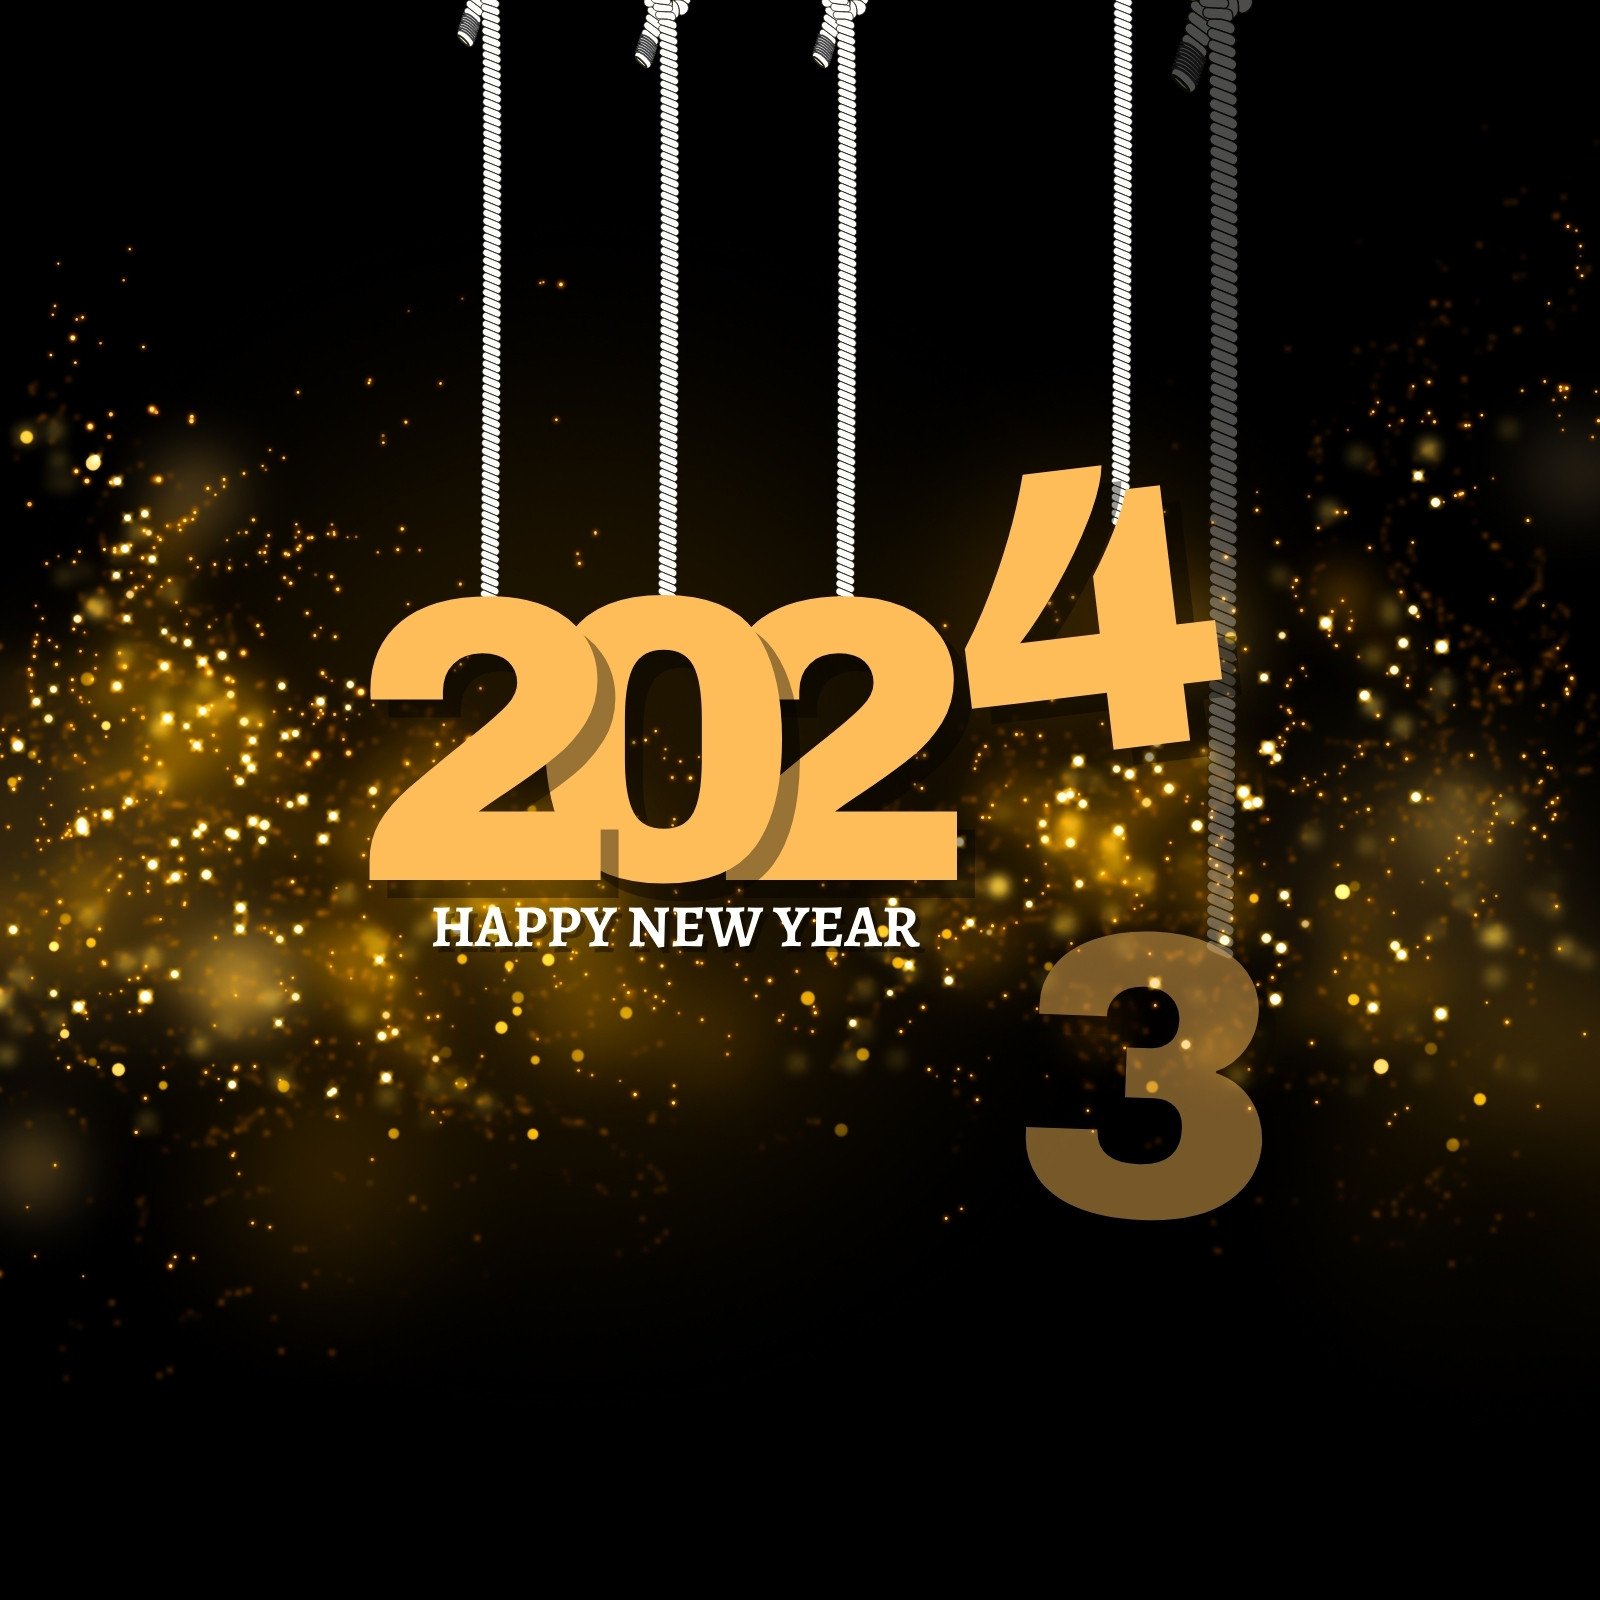 FREE Happy New Year 2023 Template - Download in Word, Google Docs